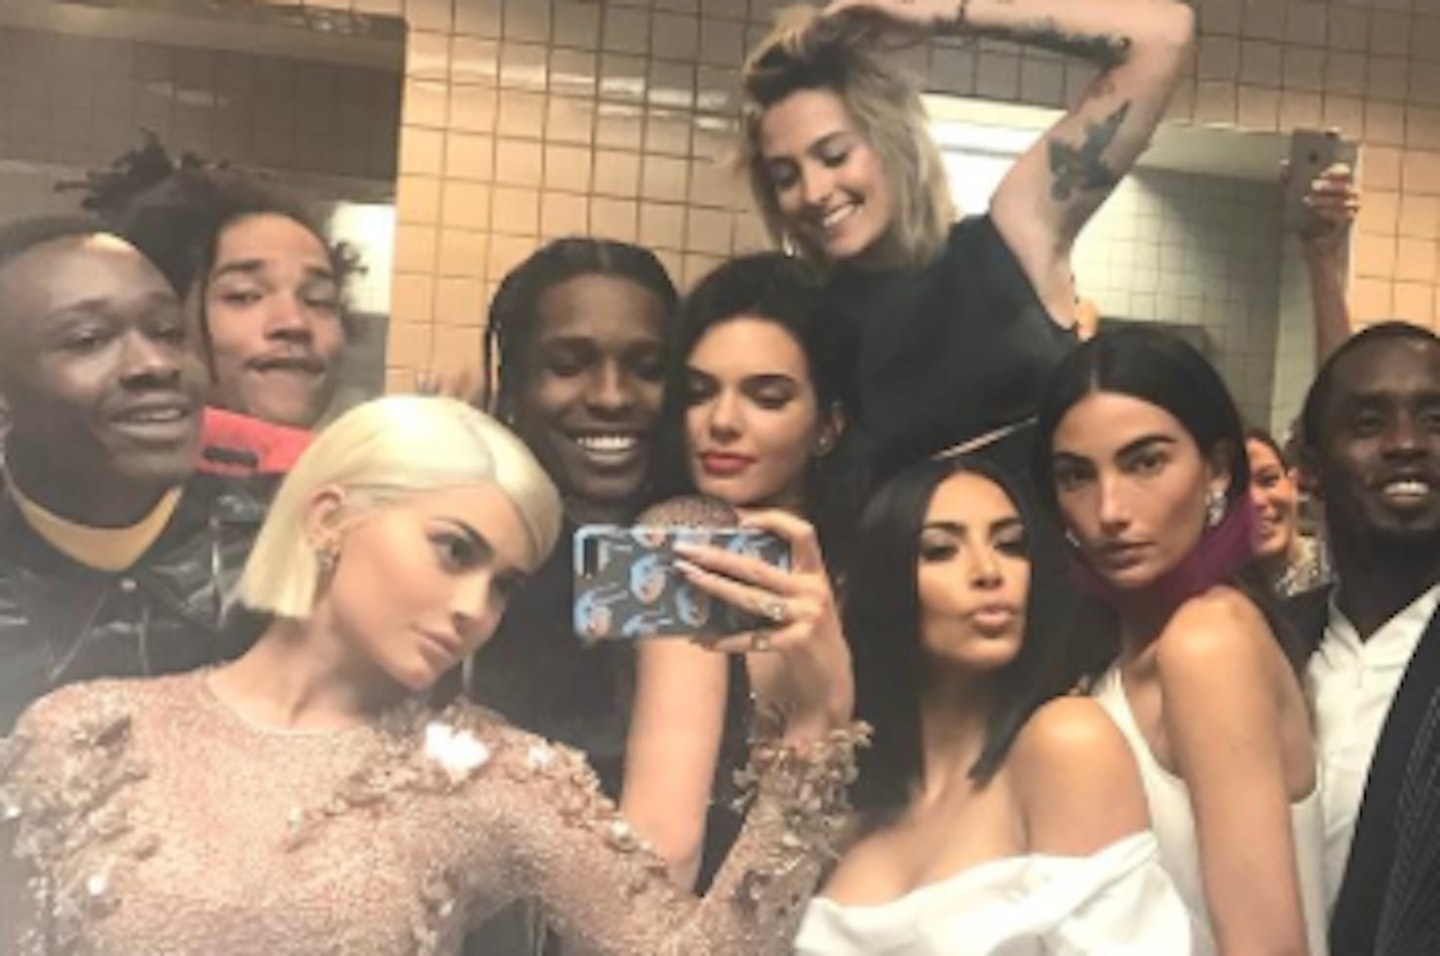 Kendall Jenner and A$AP Rocky Got VERY Cozy at the Met Gala